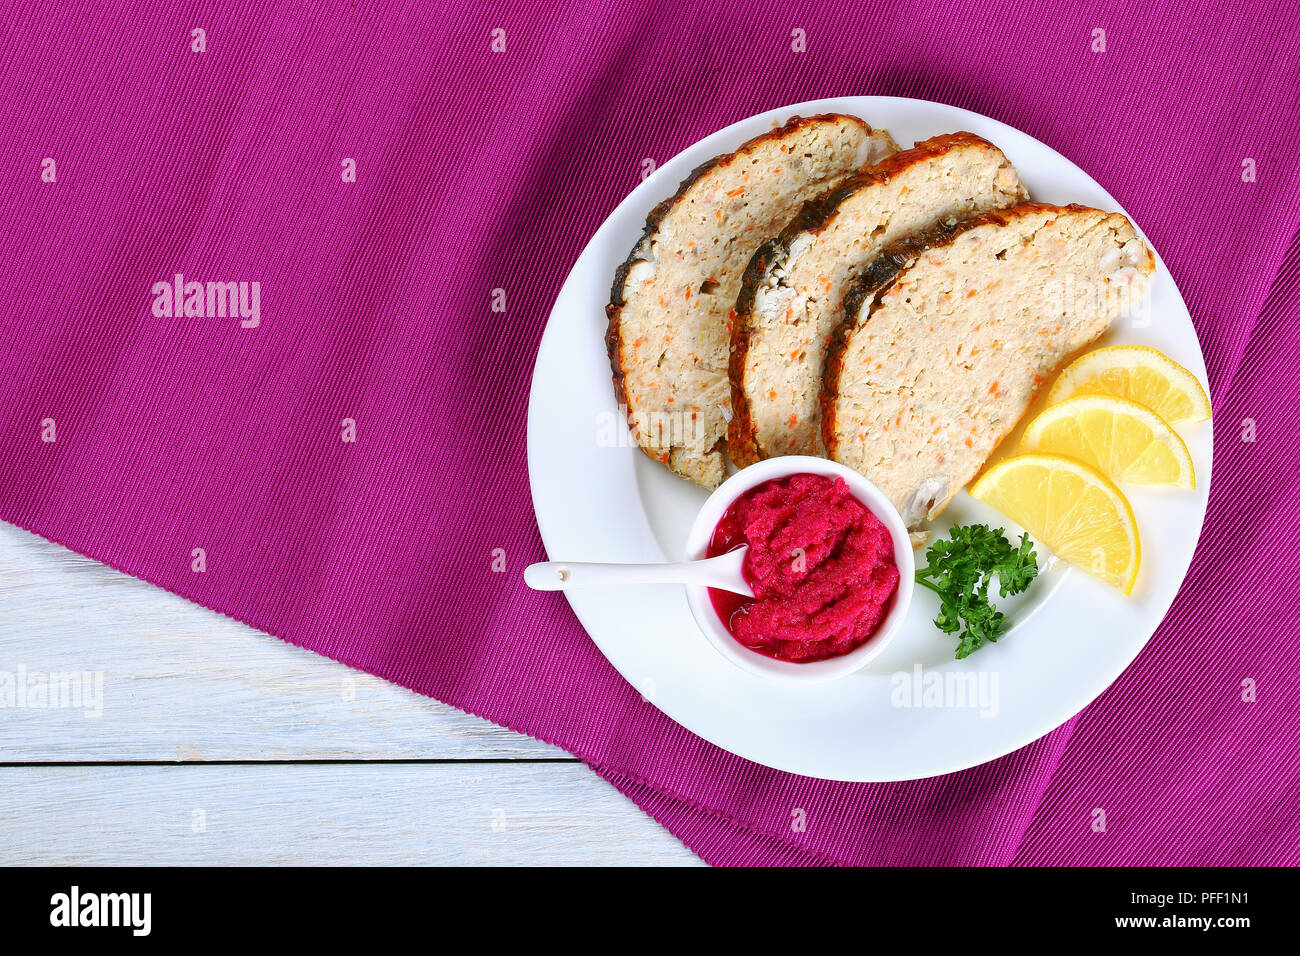 Jewish carp or minced-fish forcemeat stuffed inside the fish skin, cut in slices and served  with lemon slices and horseradish flavored with beetroot, Stock Photo